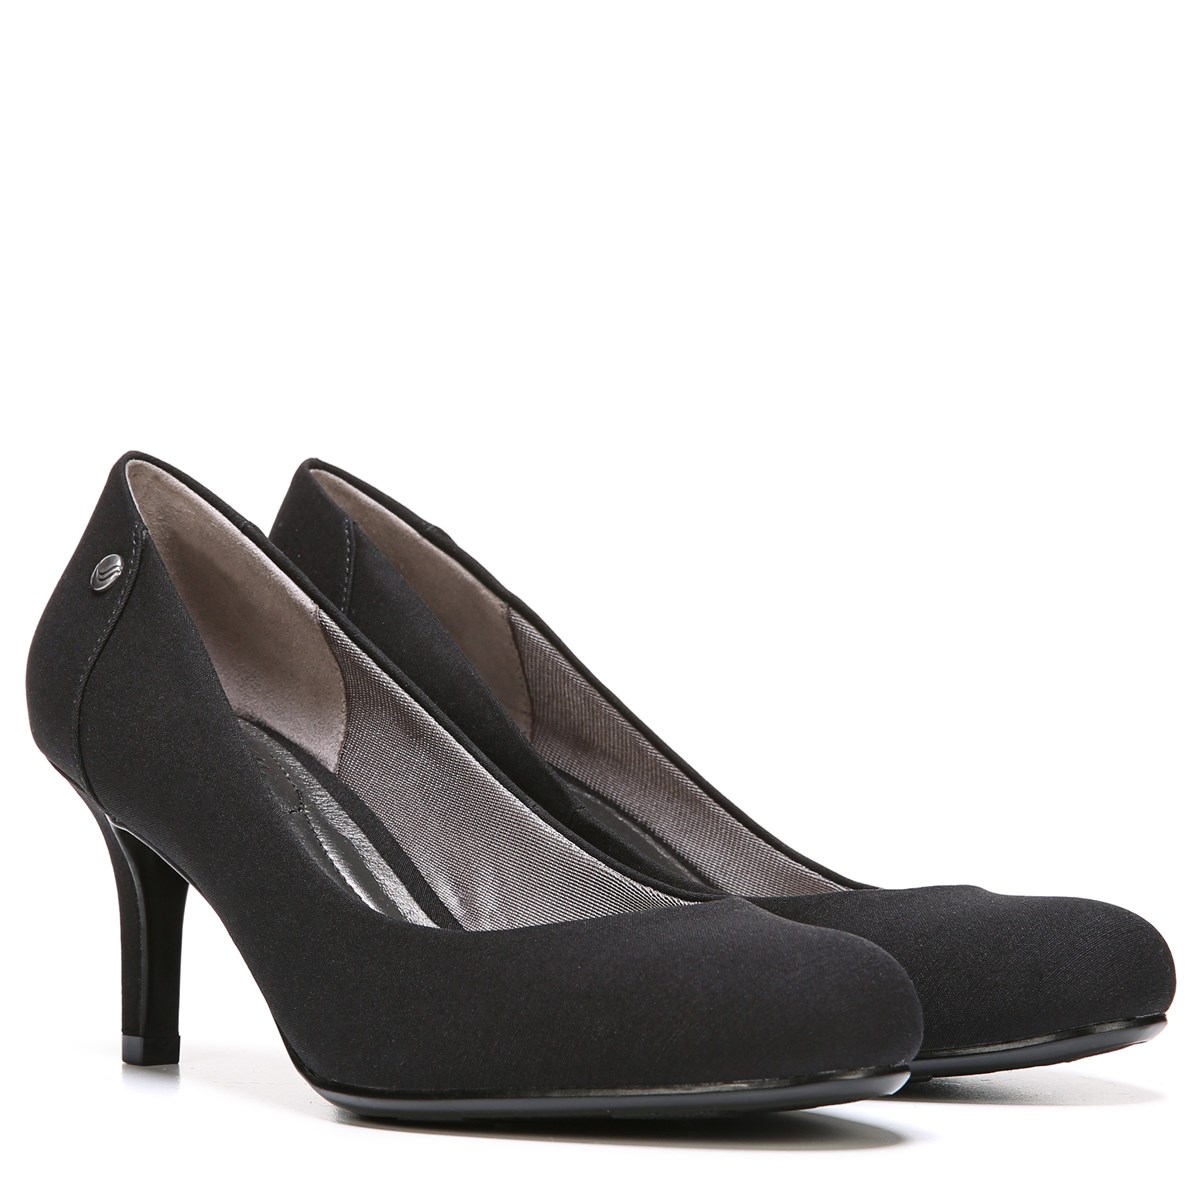 LifeStride Lively Pump in Black Fabric 